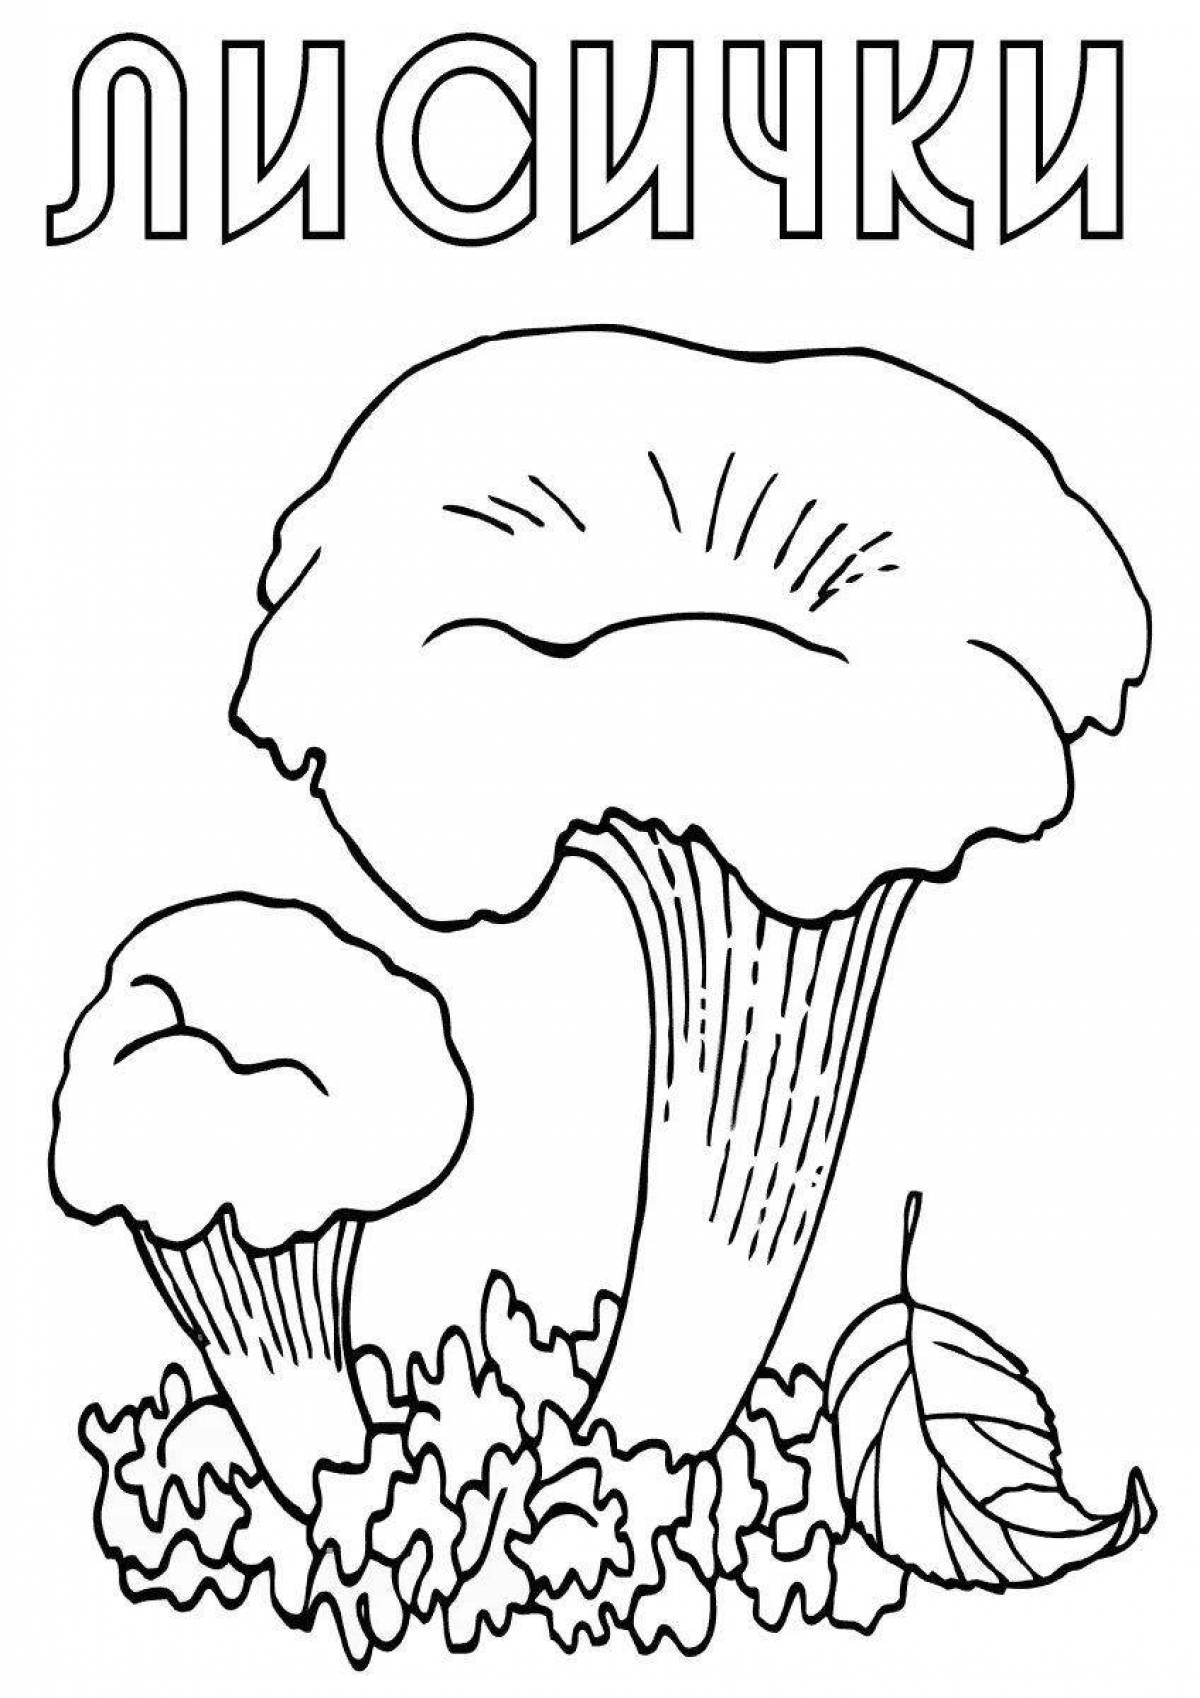 Amazing mushroom structure coloring page